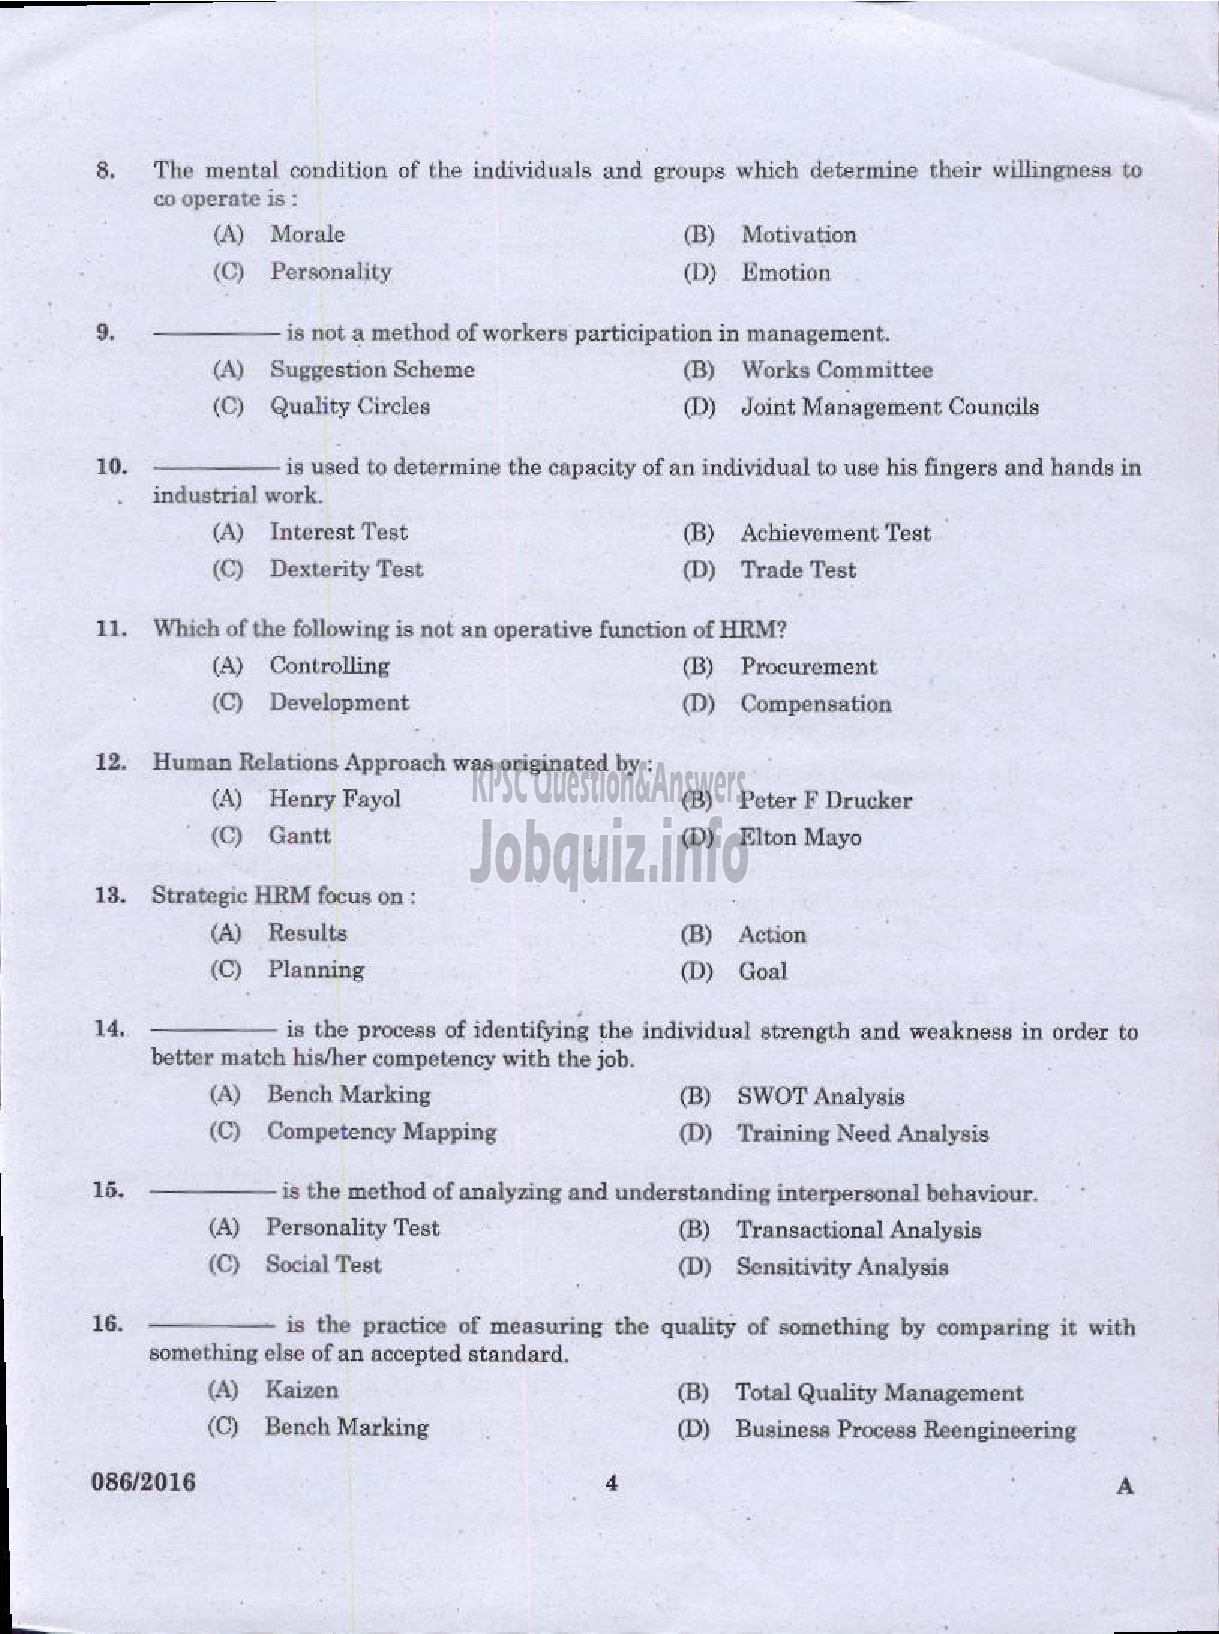 Kerala PSC Question Paper - PERSONNEL MANAGER KERALA STATE COIR CORPORATION LIMITED-2